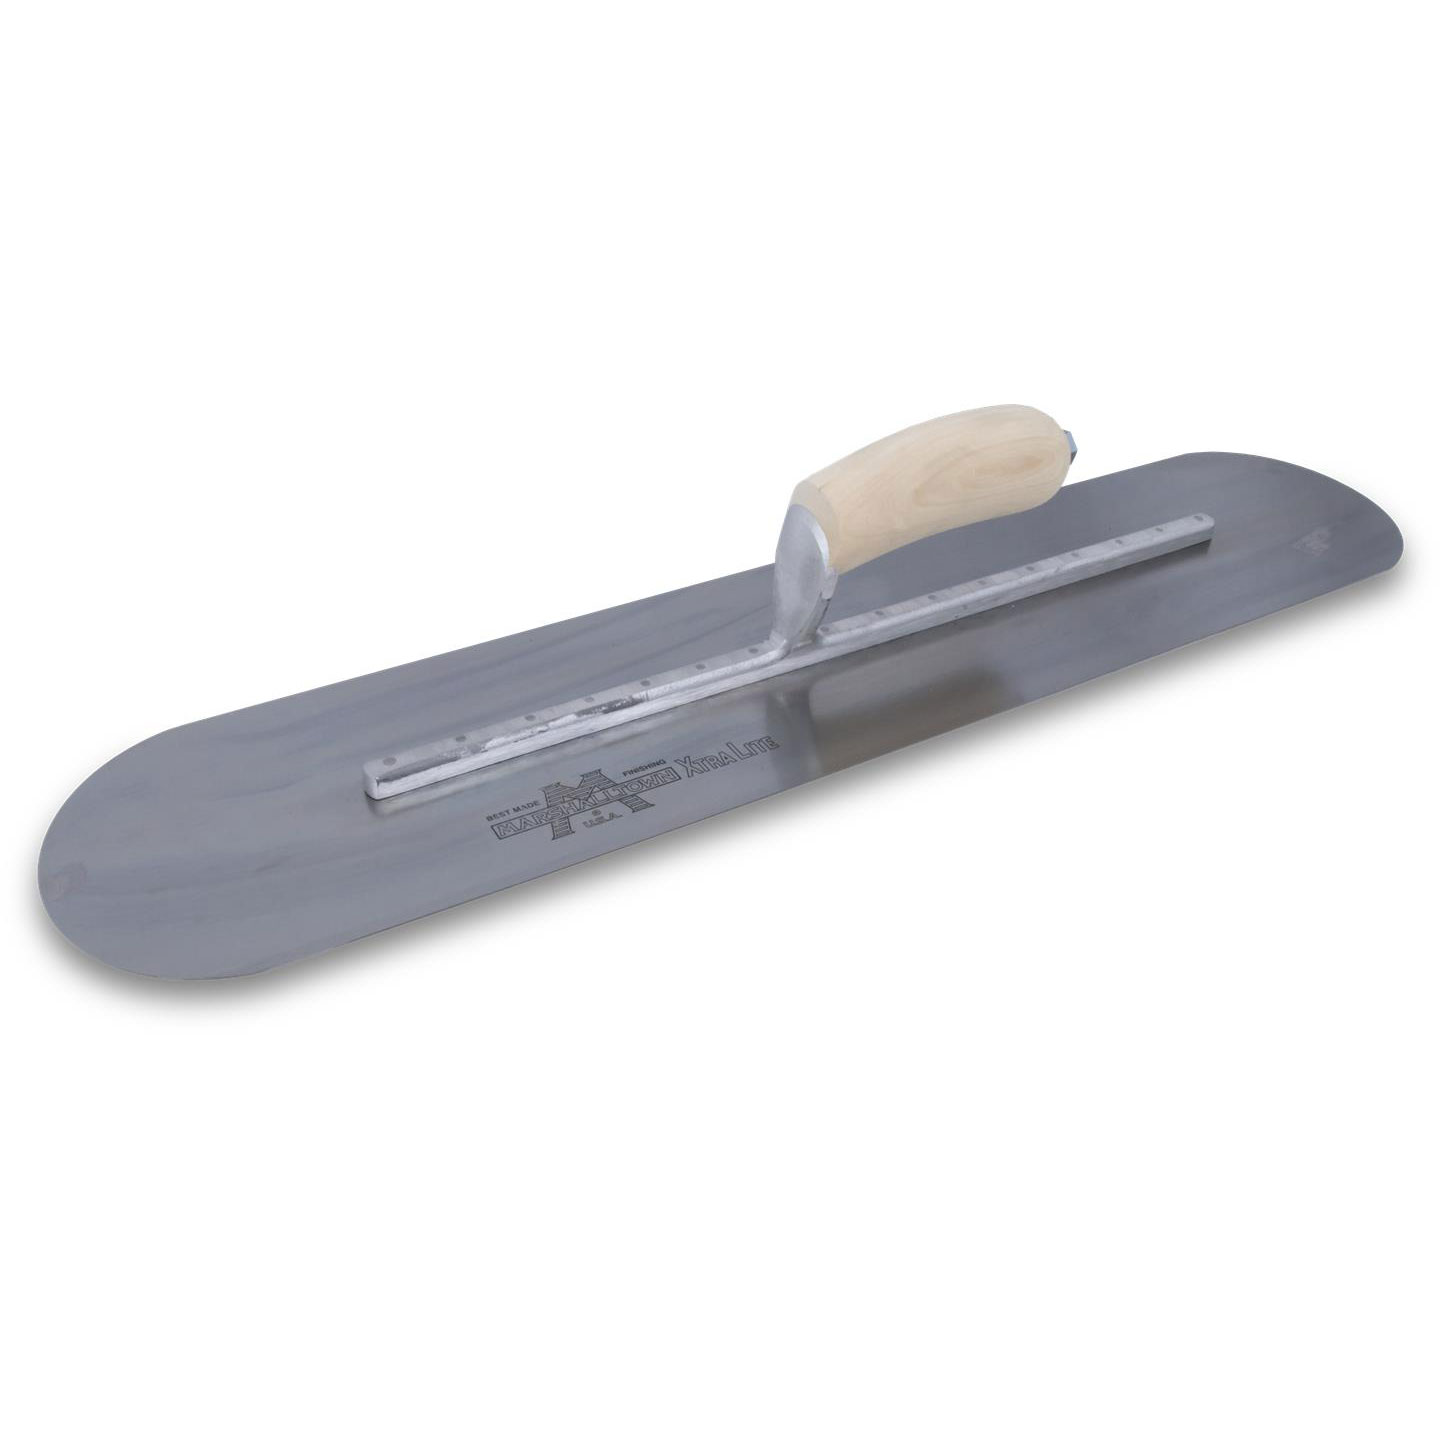 Marshalltown MXS205FR - 20in X 5in Finishing Trowel-Round End w/Curved Wood Handle MAT-MXS205FR